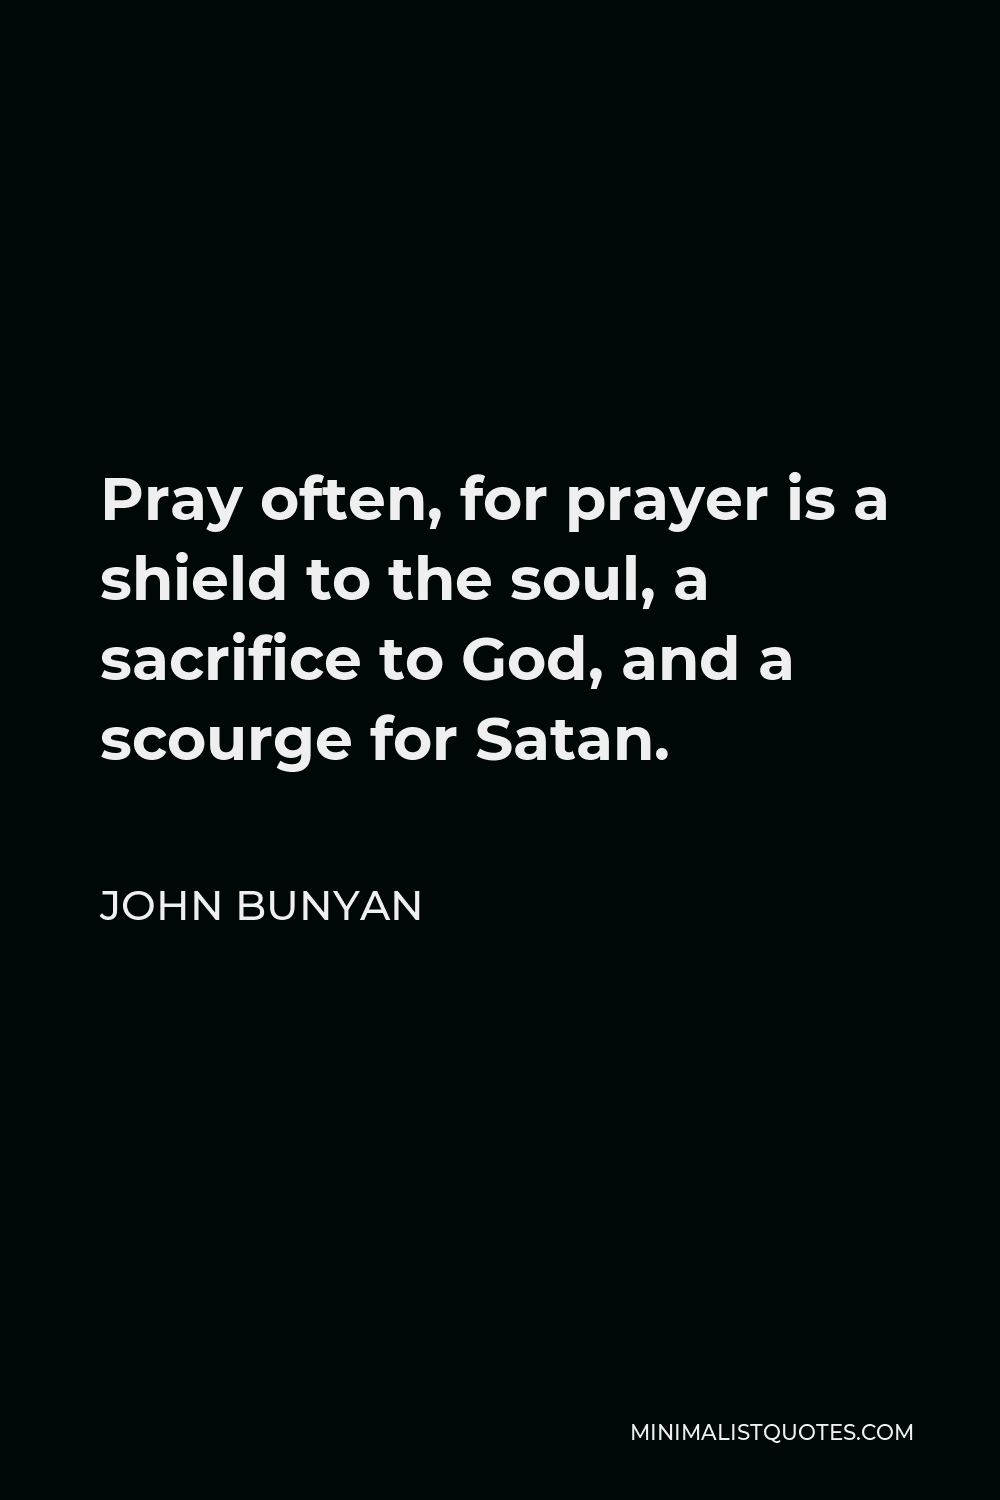 John Bunyan Quote - Pray often, for prayer is a shield to the soul, a sacrifice to God, and a scourge for Satan.